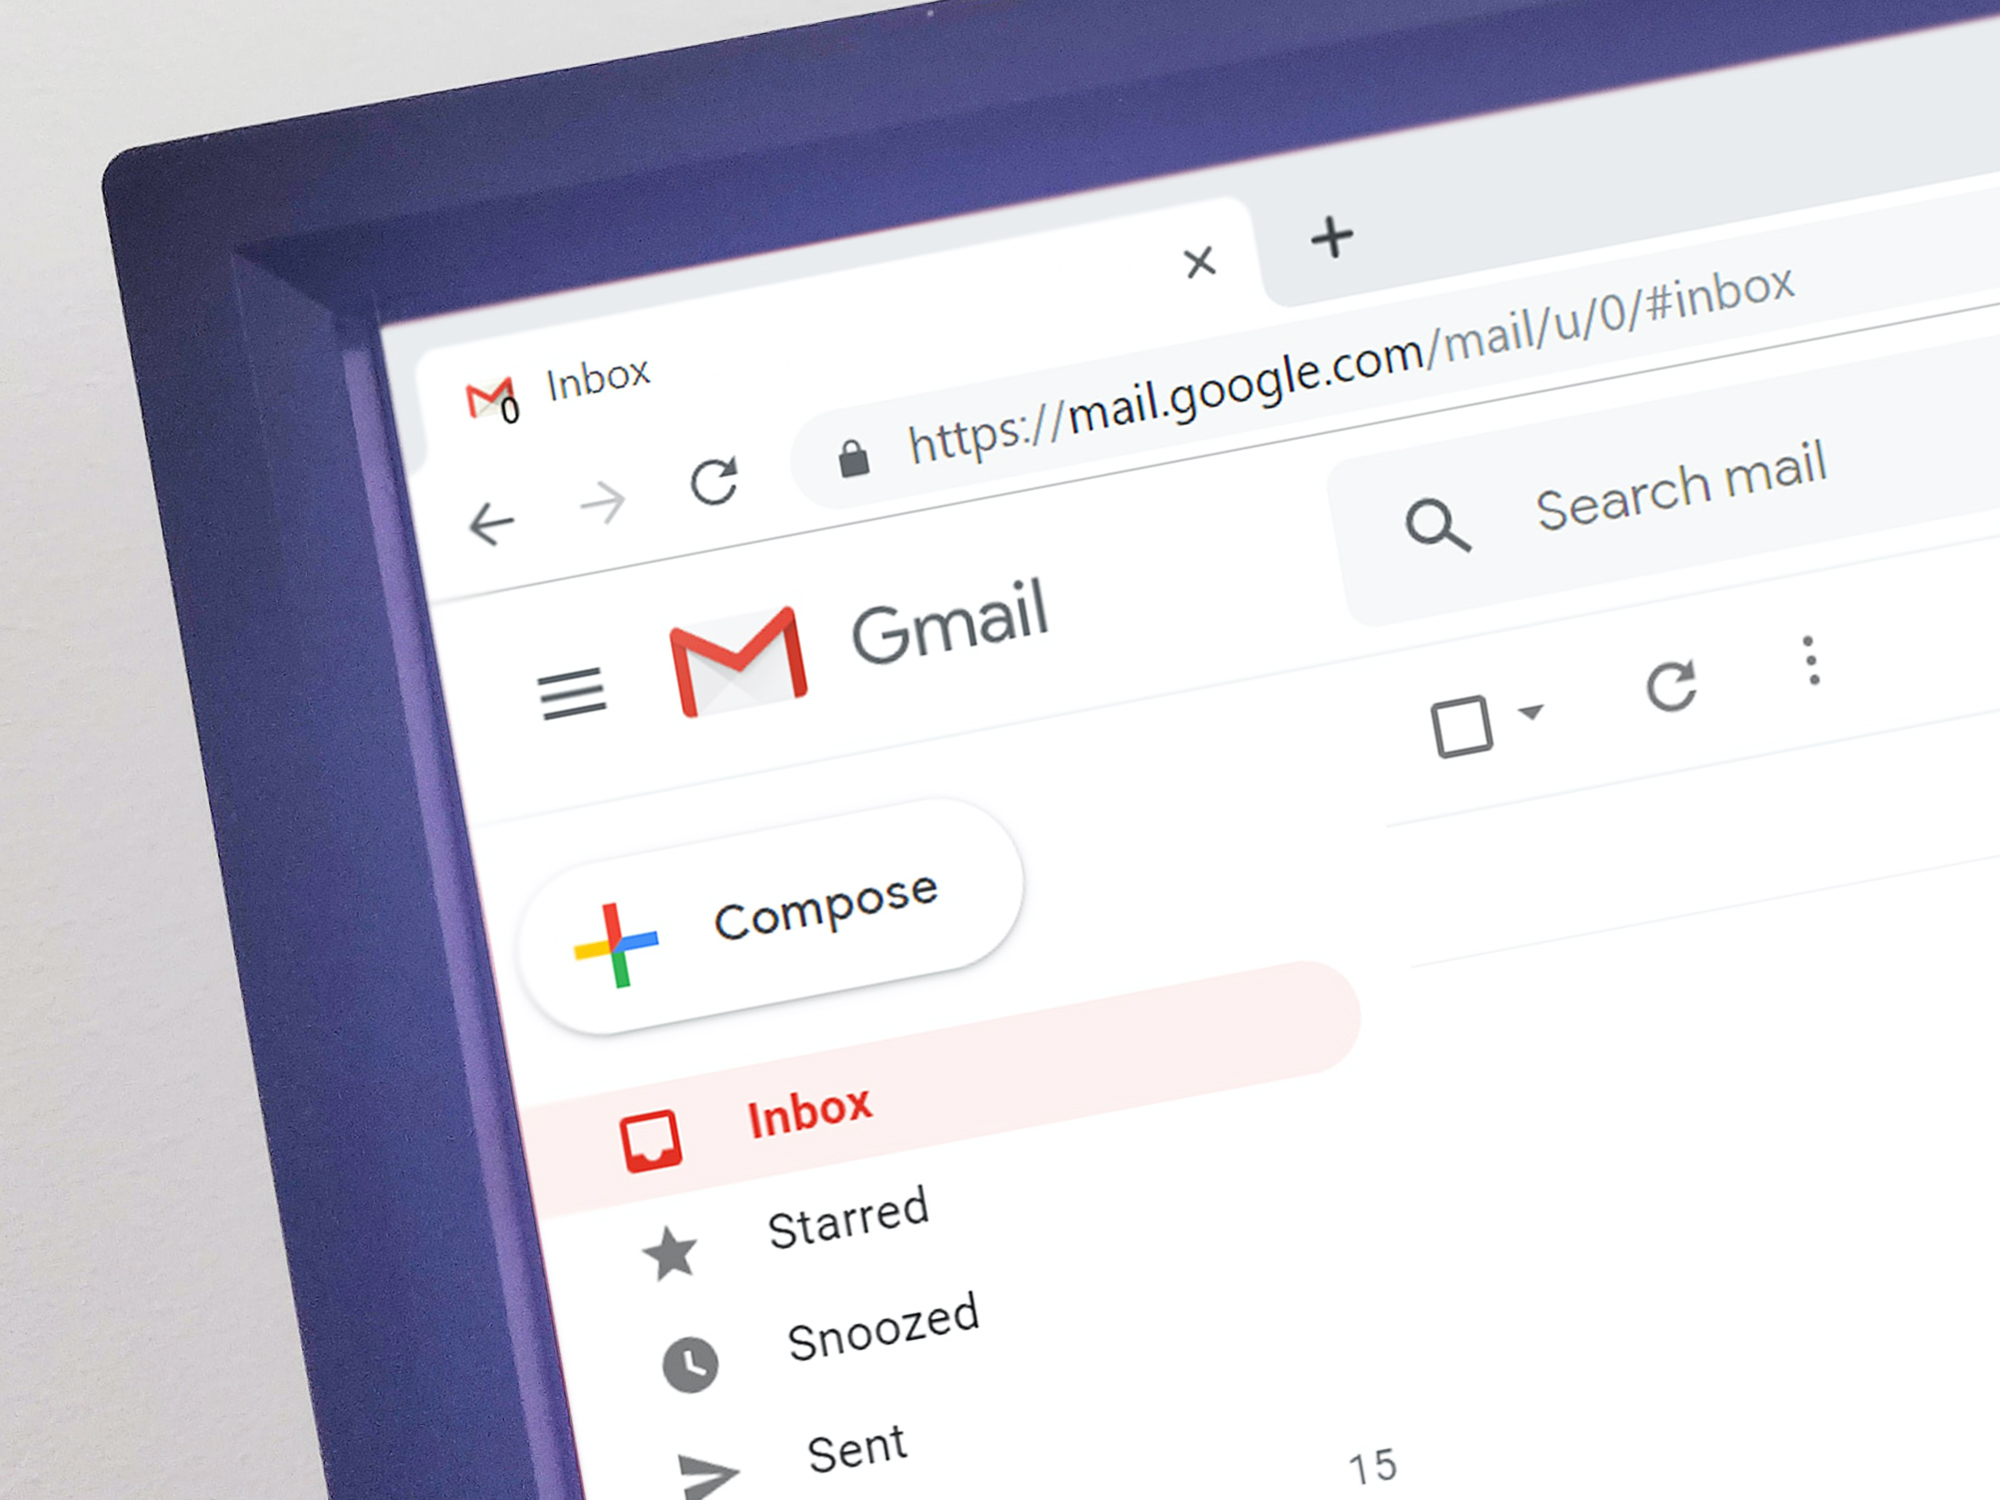 How to connect to Gmail, check my inbox and read my emails?